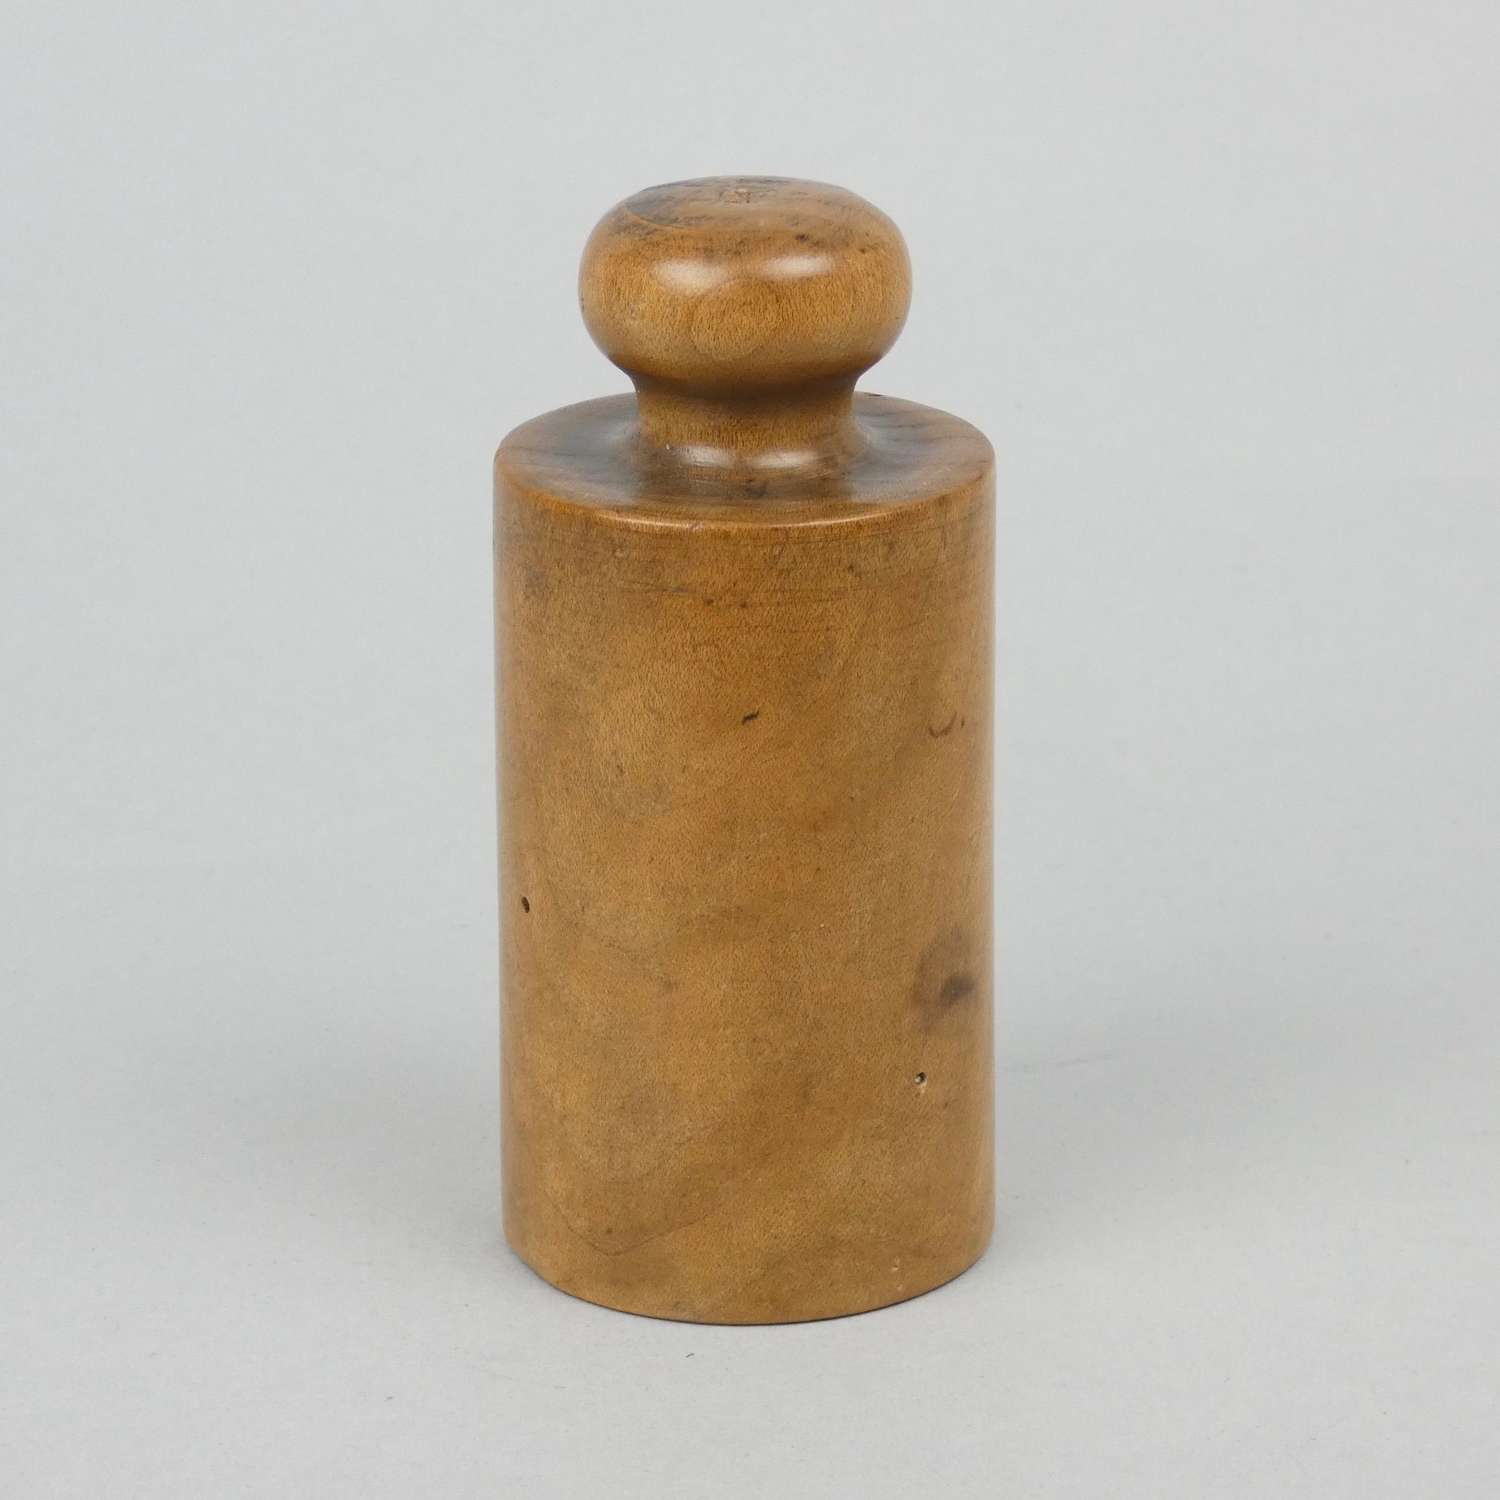 Very small, wooden pie mould